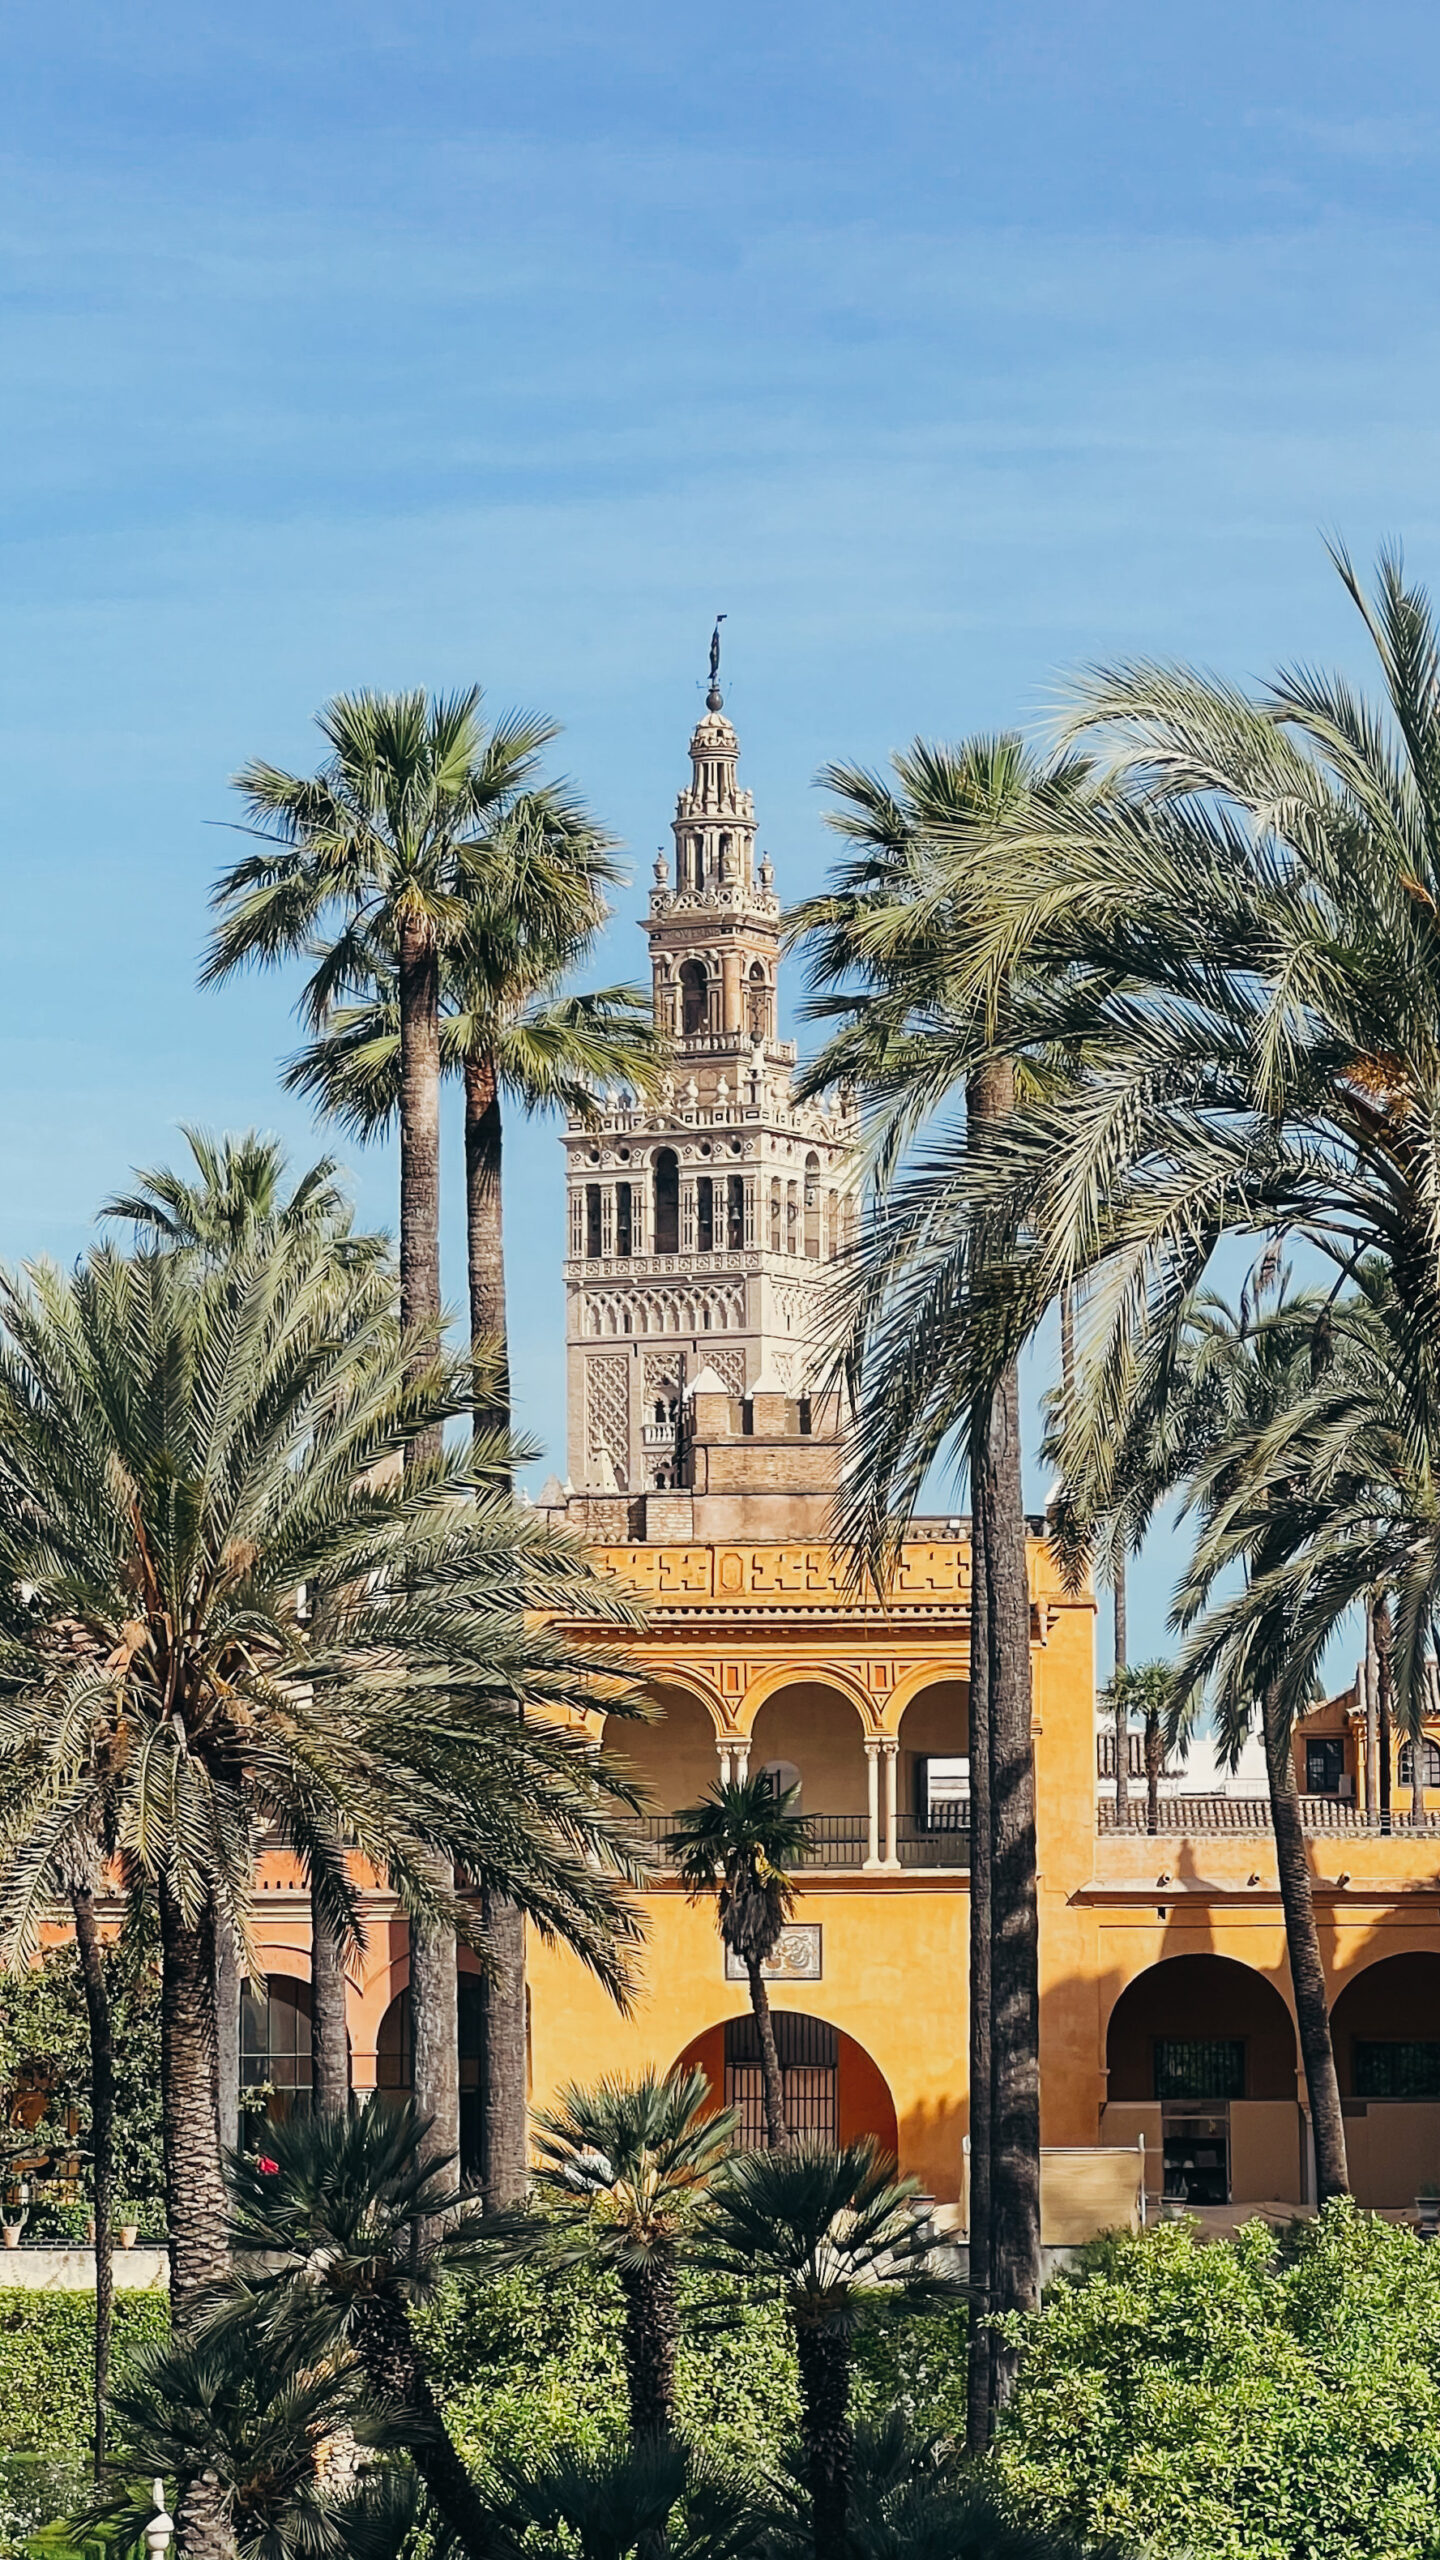 Seville, La Giralda from the gardens of the Real Alcazar, by Dancing the Earth